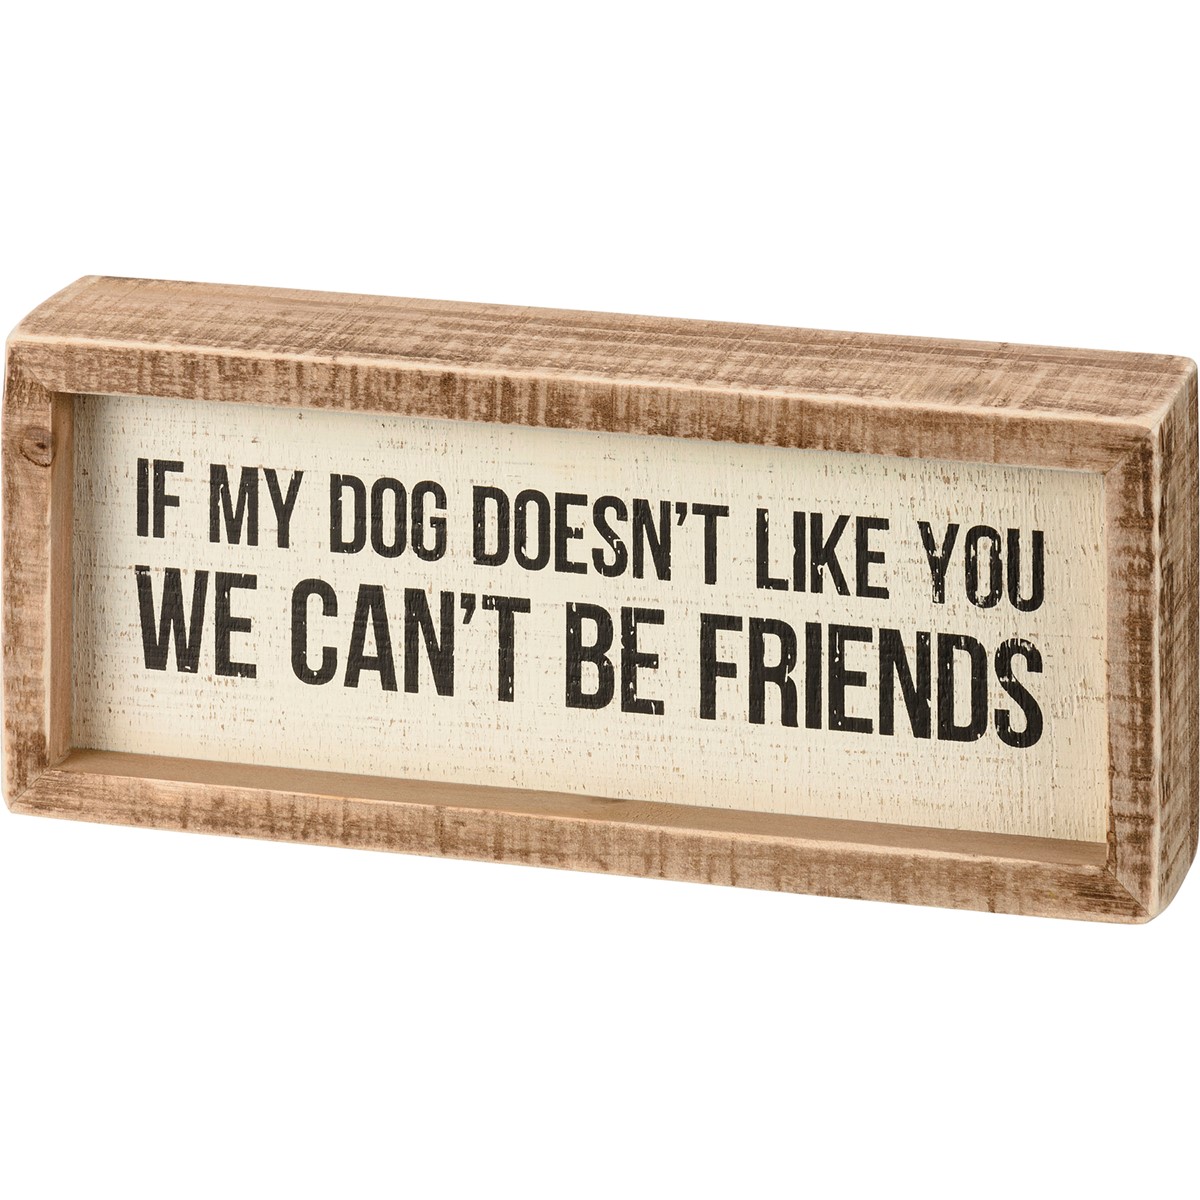 If My Dog Doesn't Like You Inset Box Sign - Wood